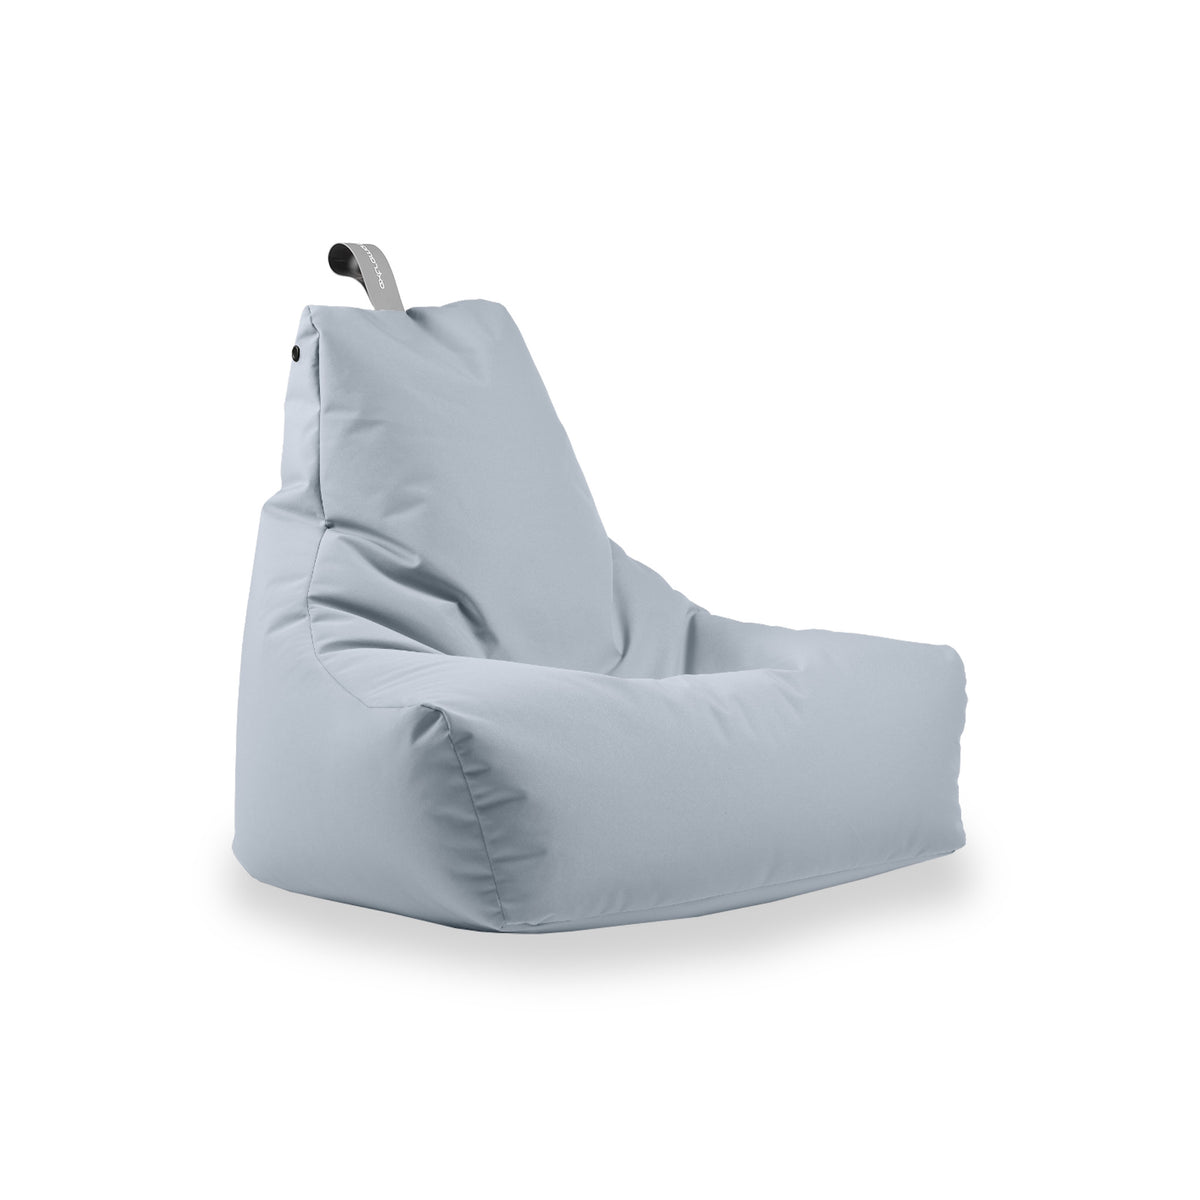 Mighty B Beanbag in Pastel Blue from Roseland Furniture